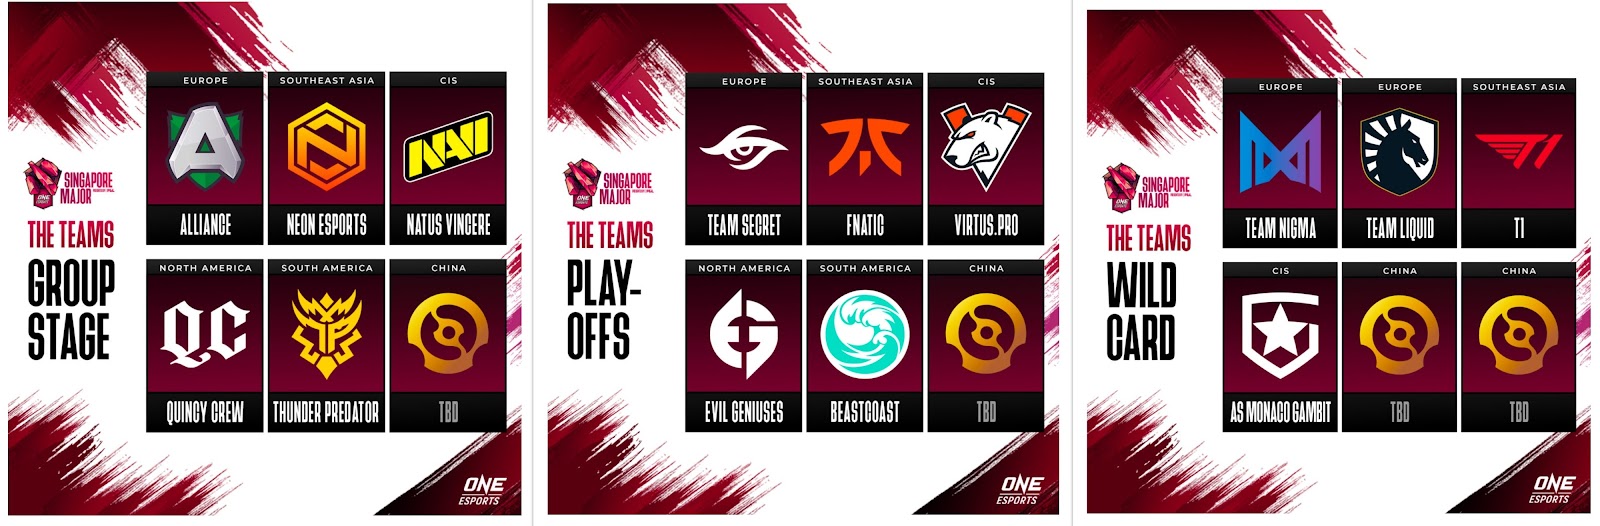 Teams to participate in the ONE Esports Singapore Major 2021